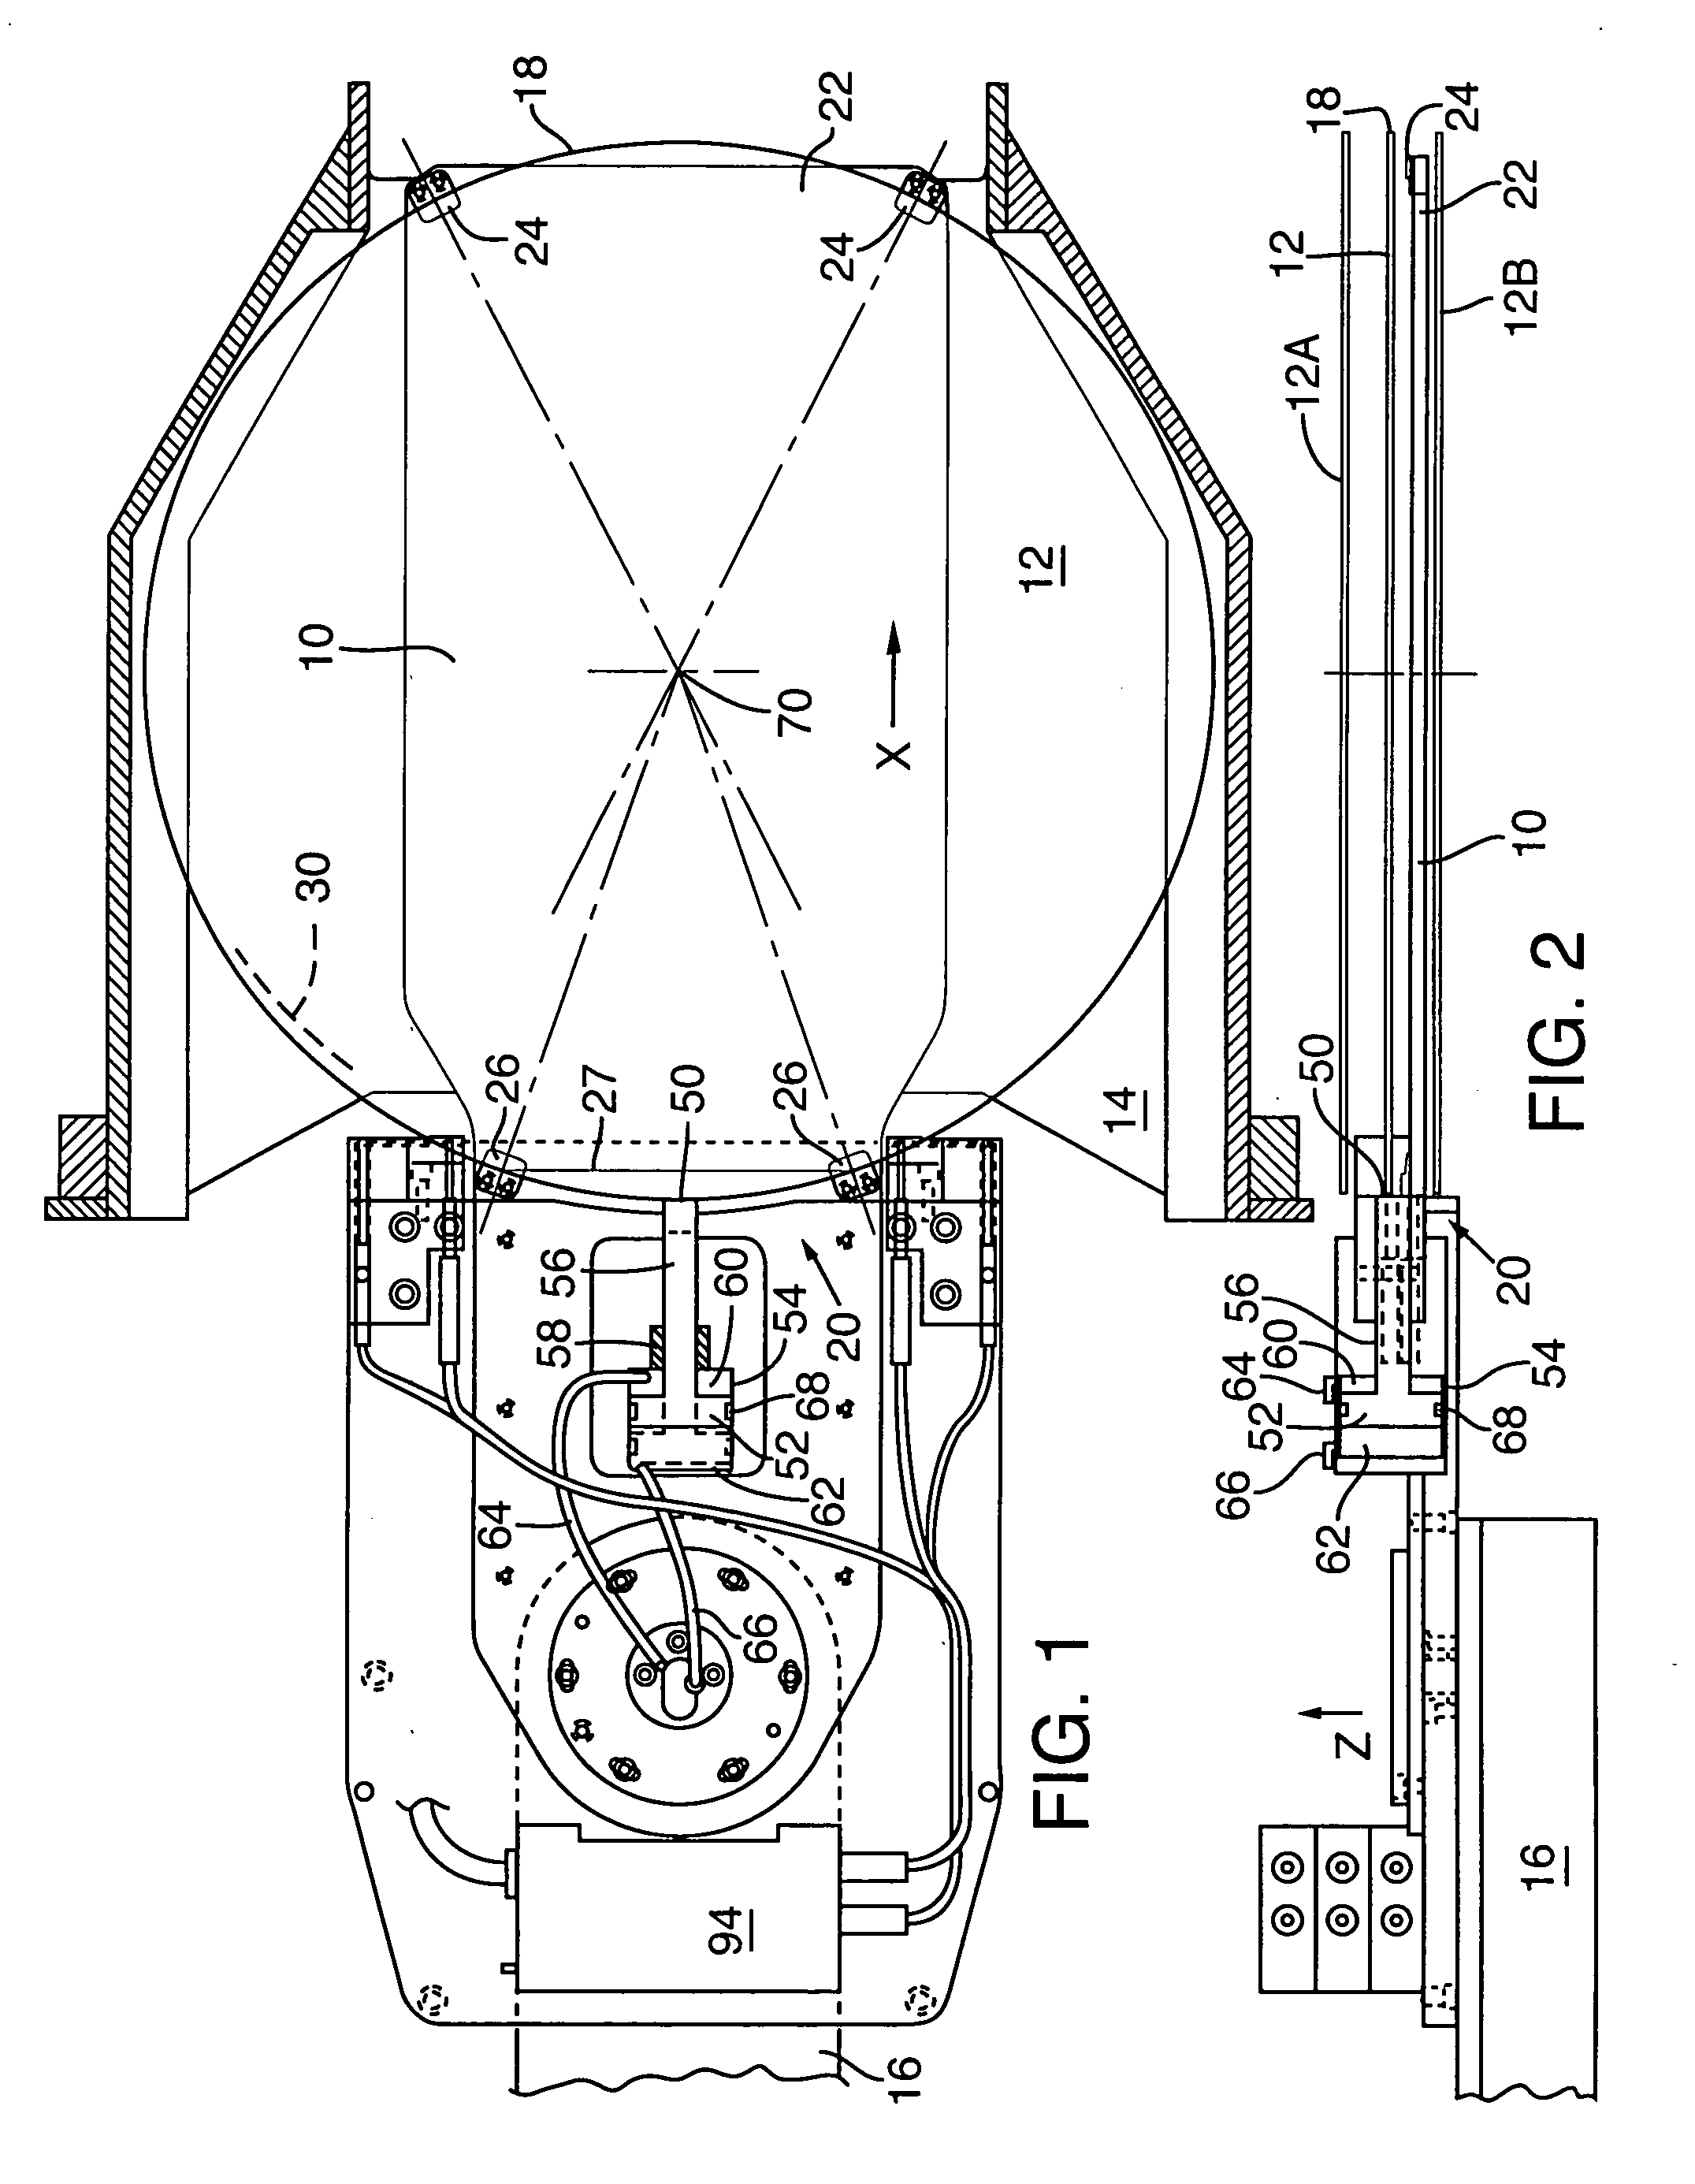 Method of determining axial alignment of the centroid of an edge gripping end effector and the center of a specimen gripped by it